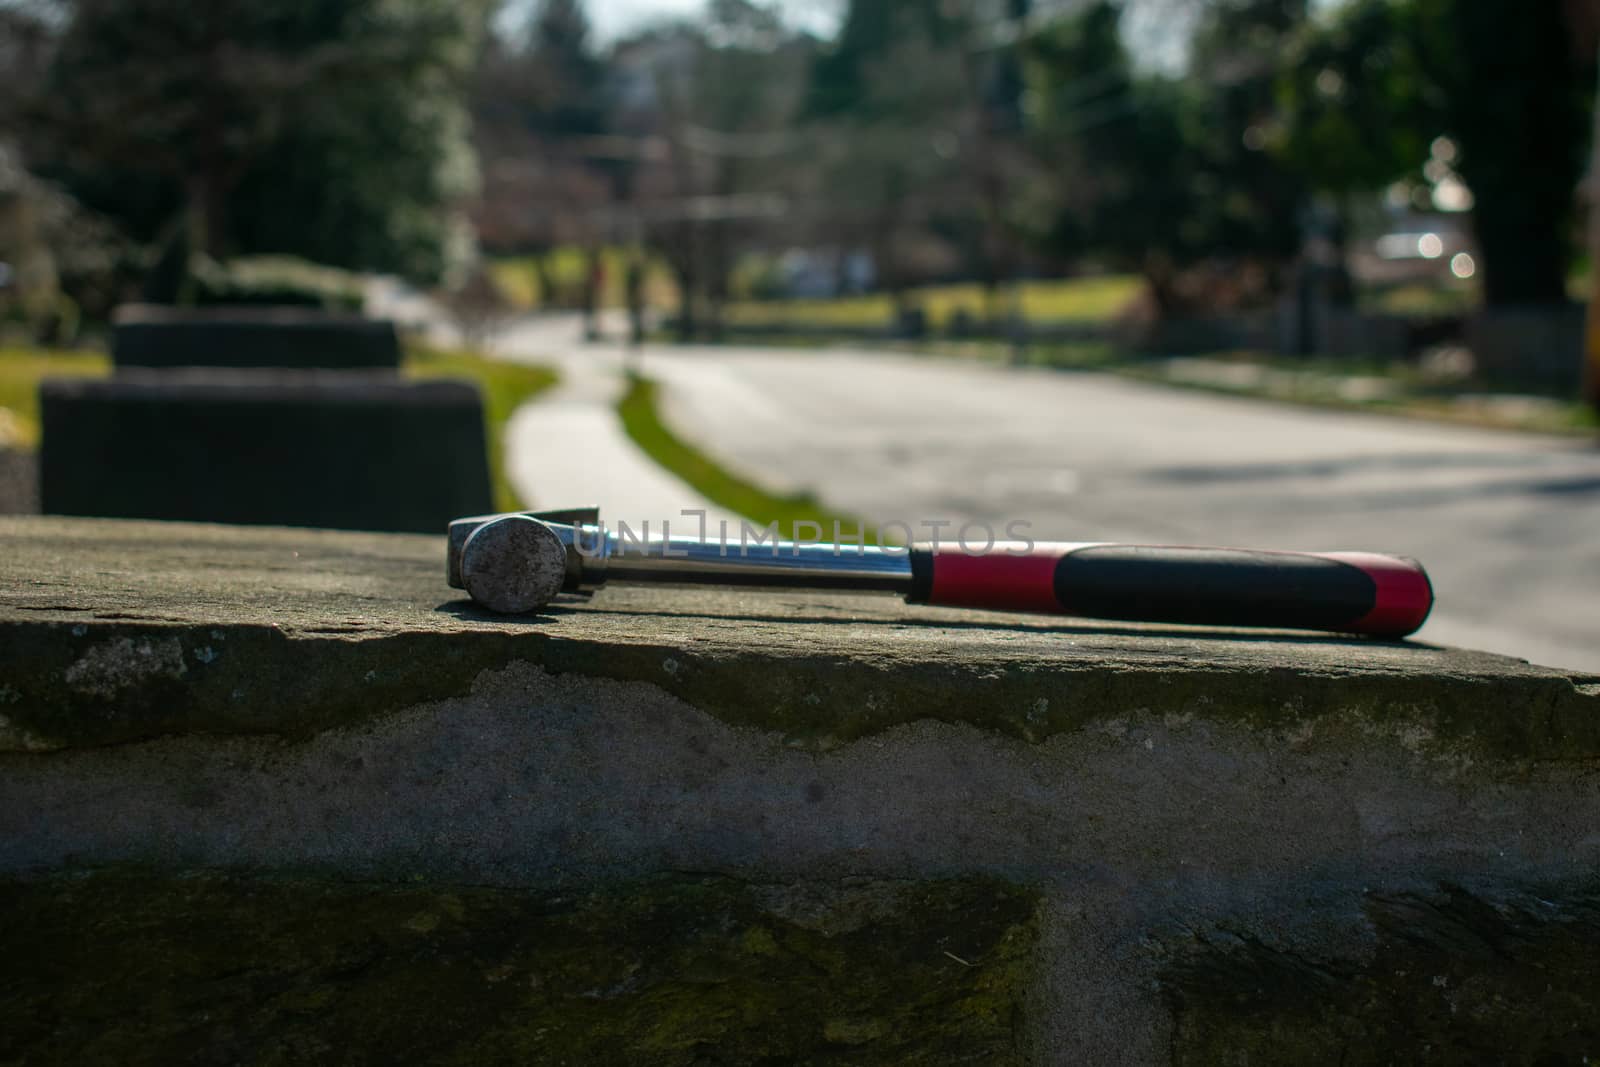 A Hammer With a Red and Black Handle on a Cobblestone Pillar on a Suburban Street